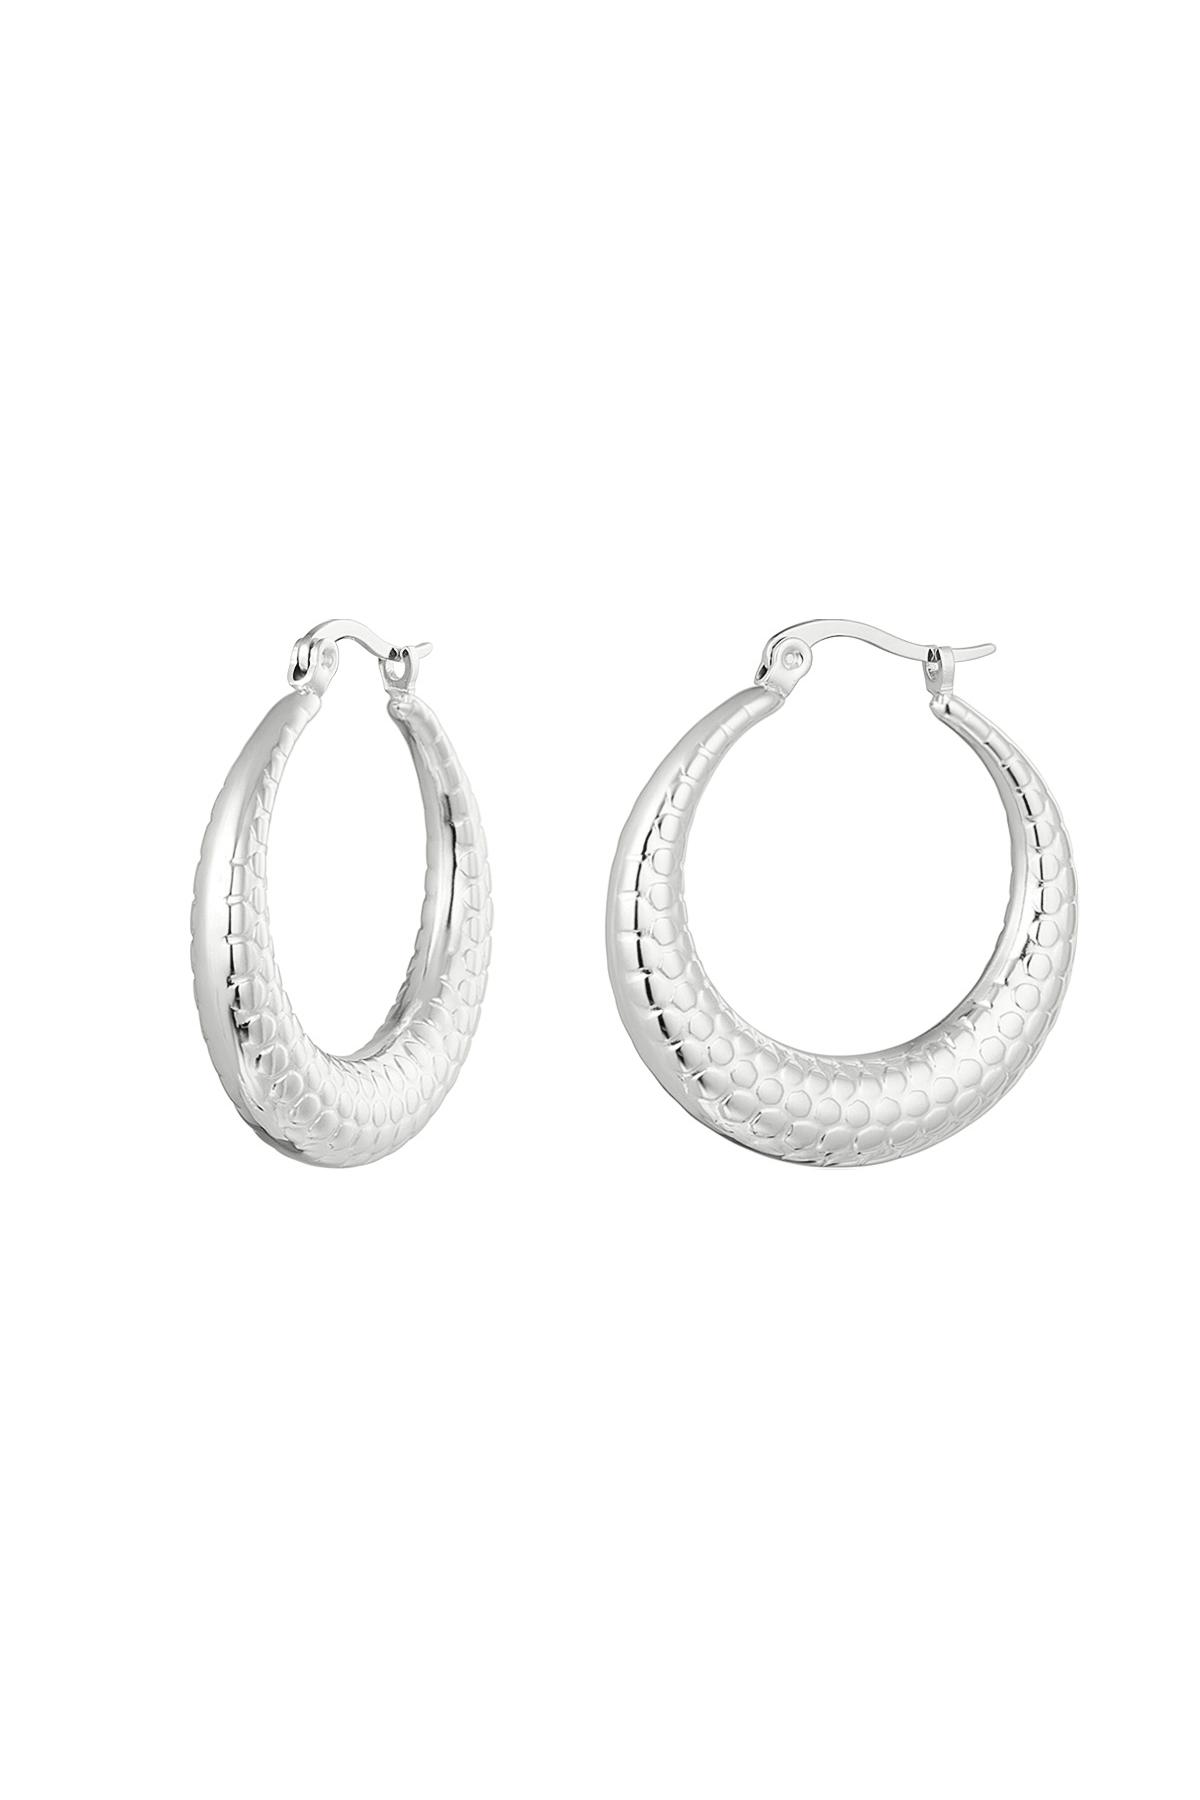 Earrings bubble print small Silver Stainless Steel h5 